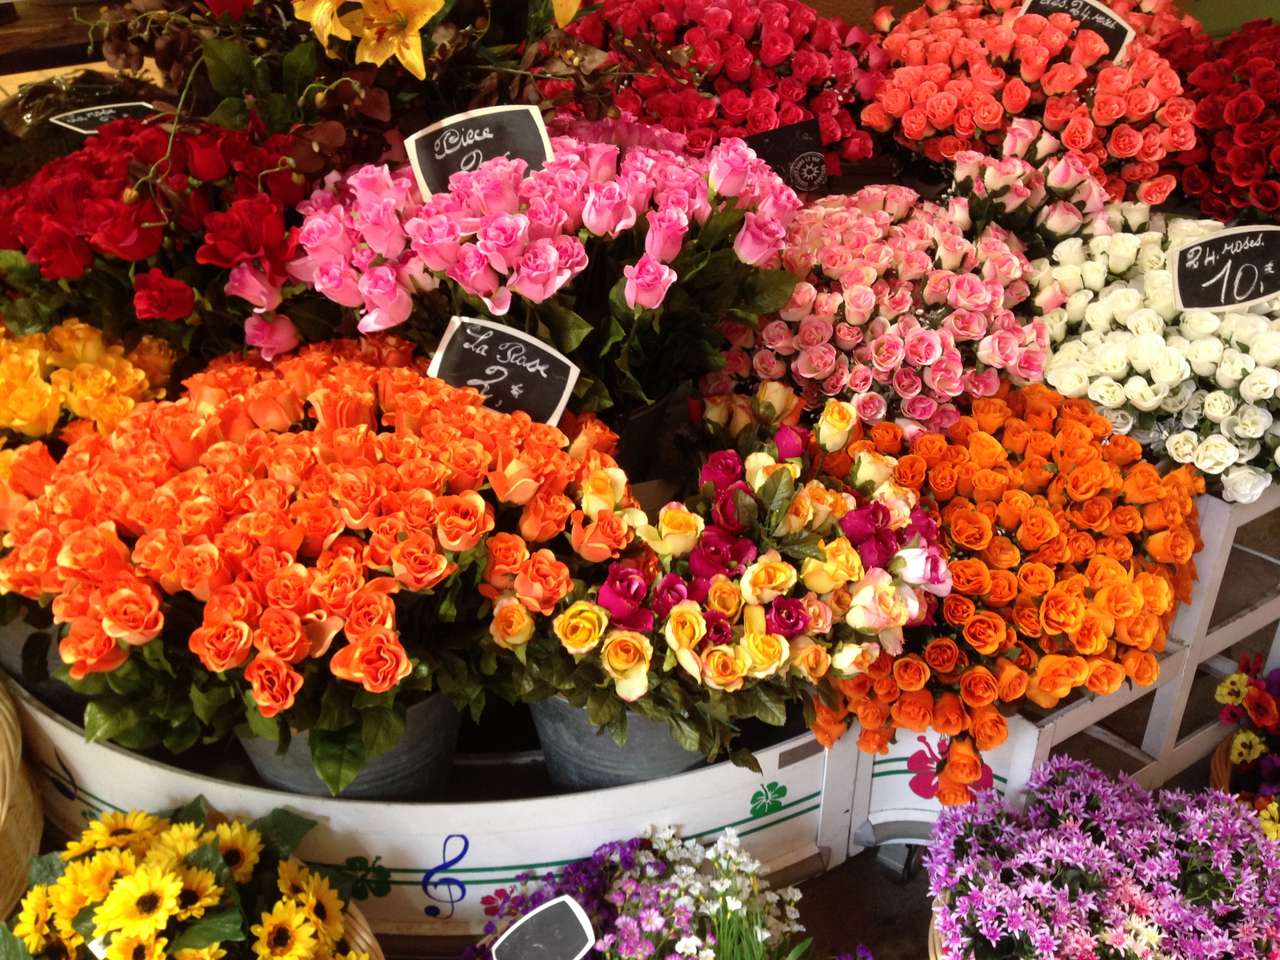 Flower Shop in Nice, France. puzzle online from photo